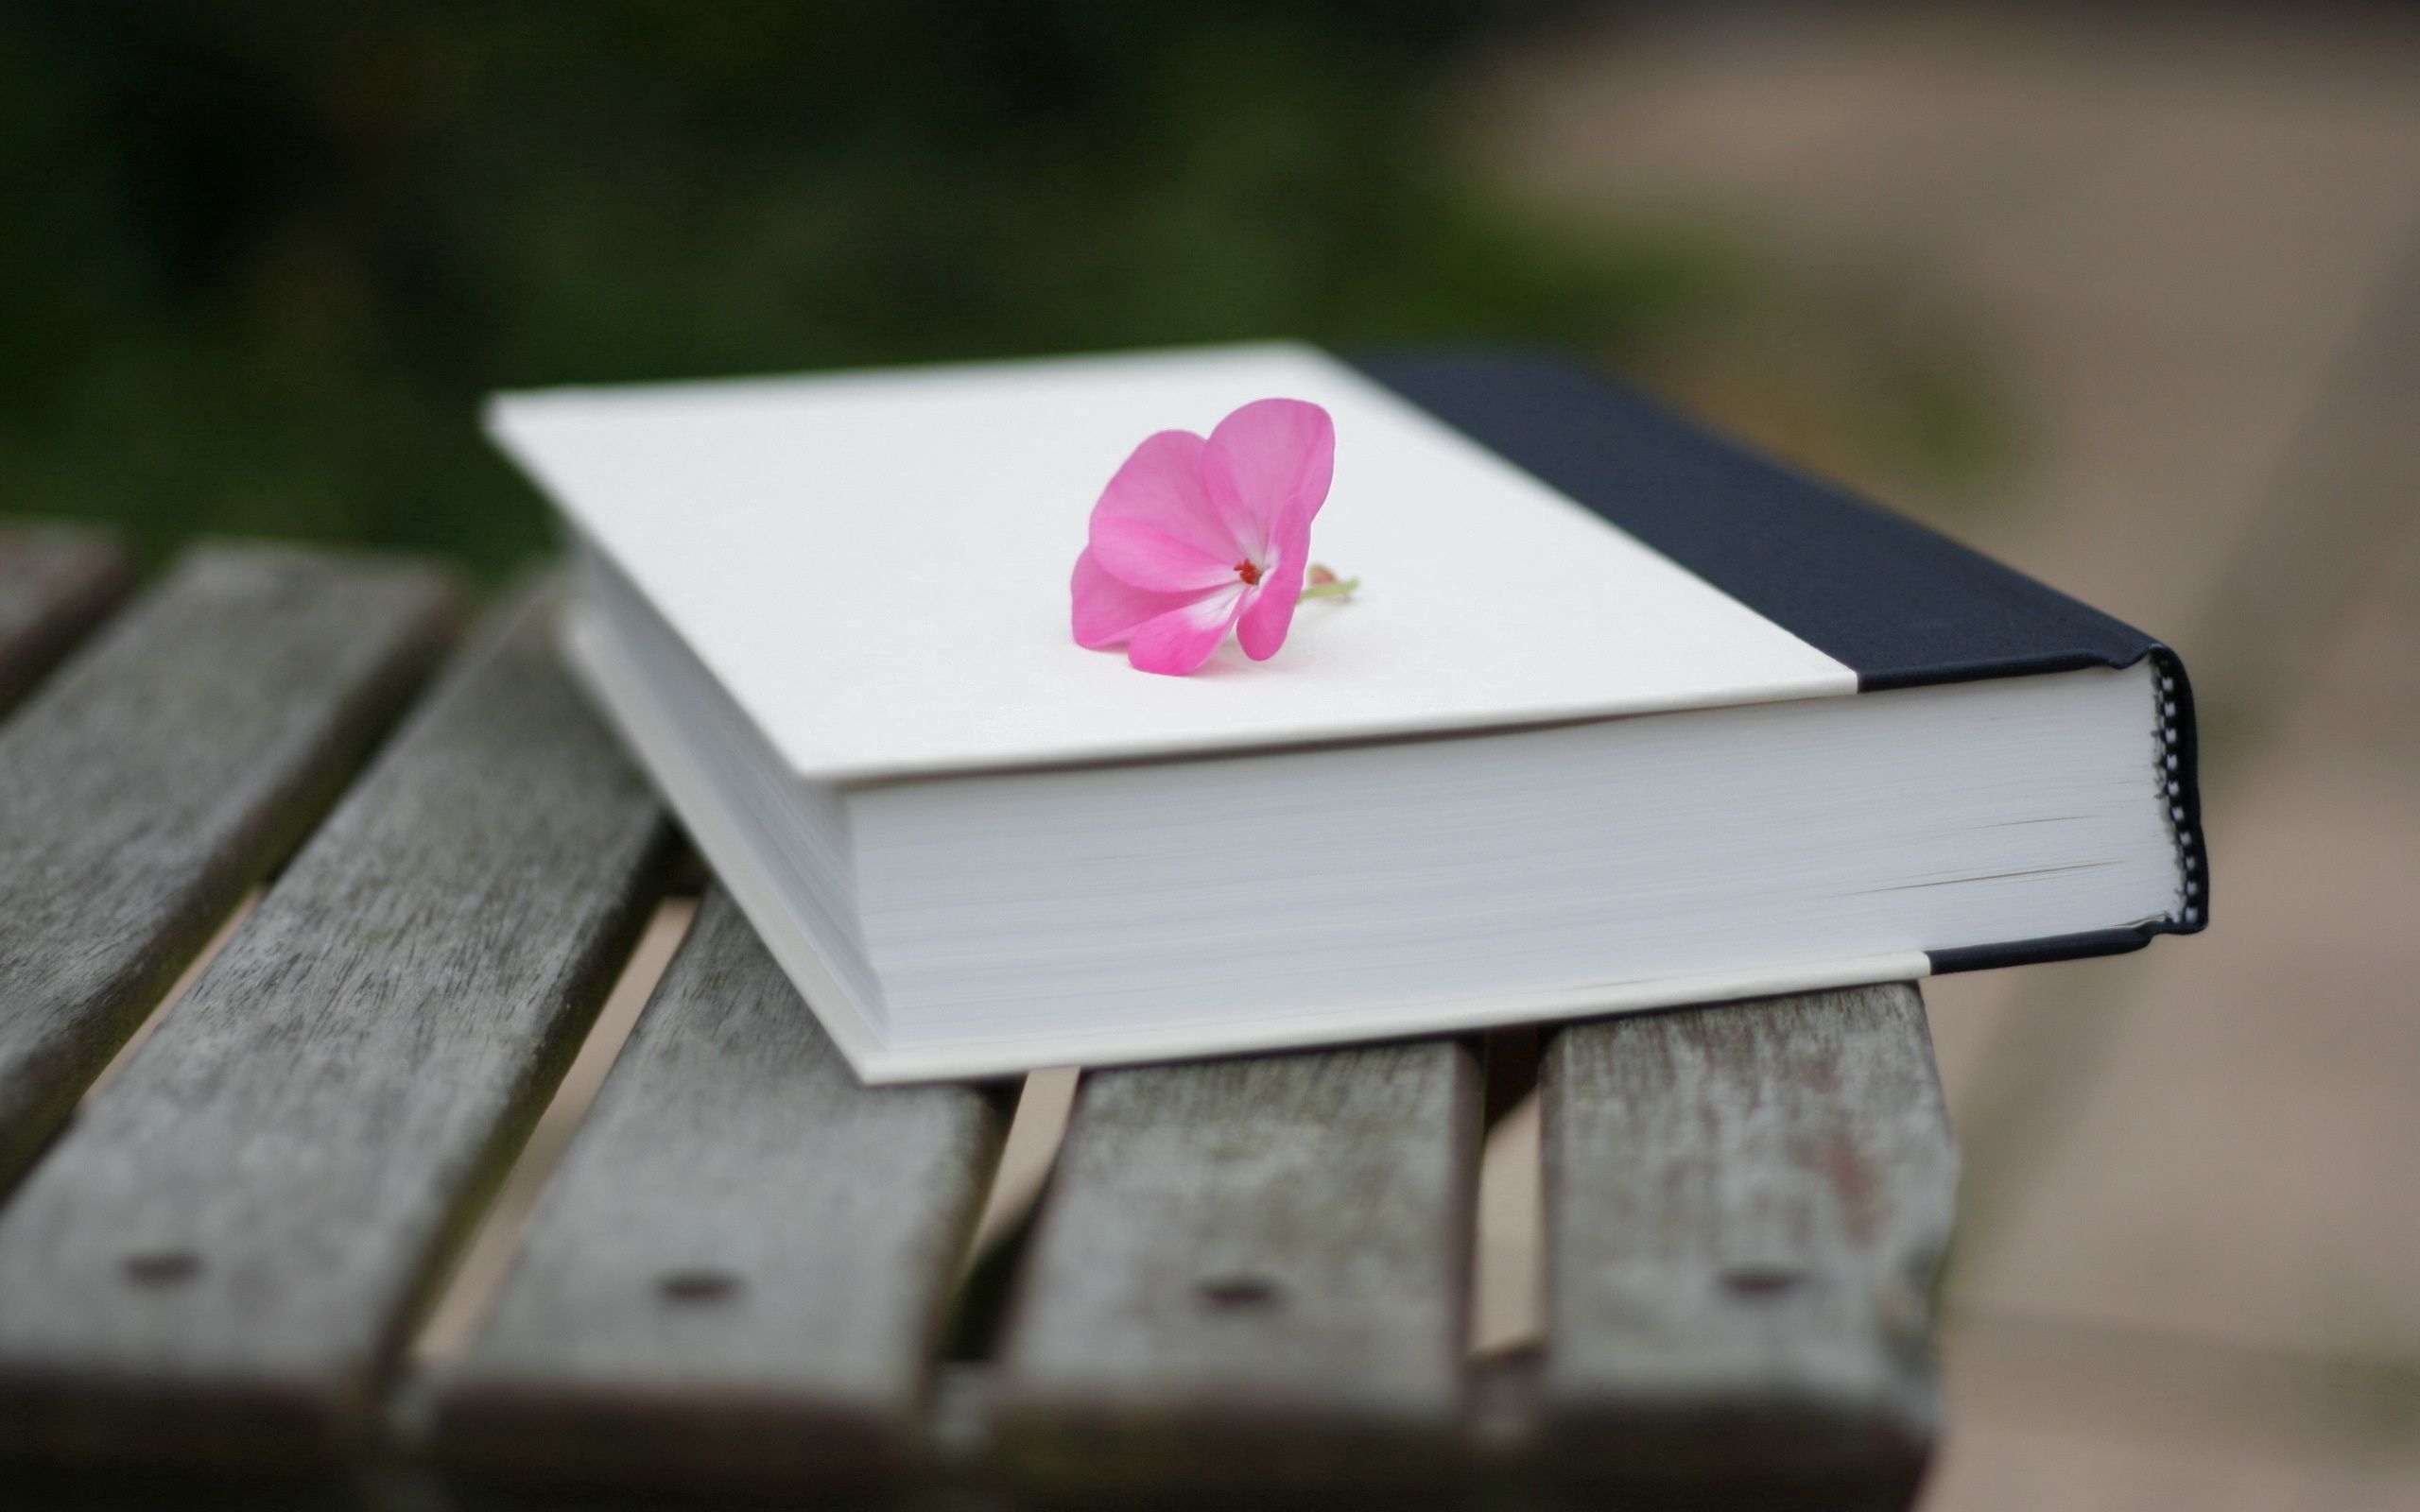 smooth, flower, miscellanea, miscellaneous, blur, book, bench, handsomely, it's beautiful